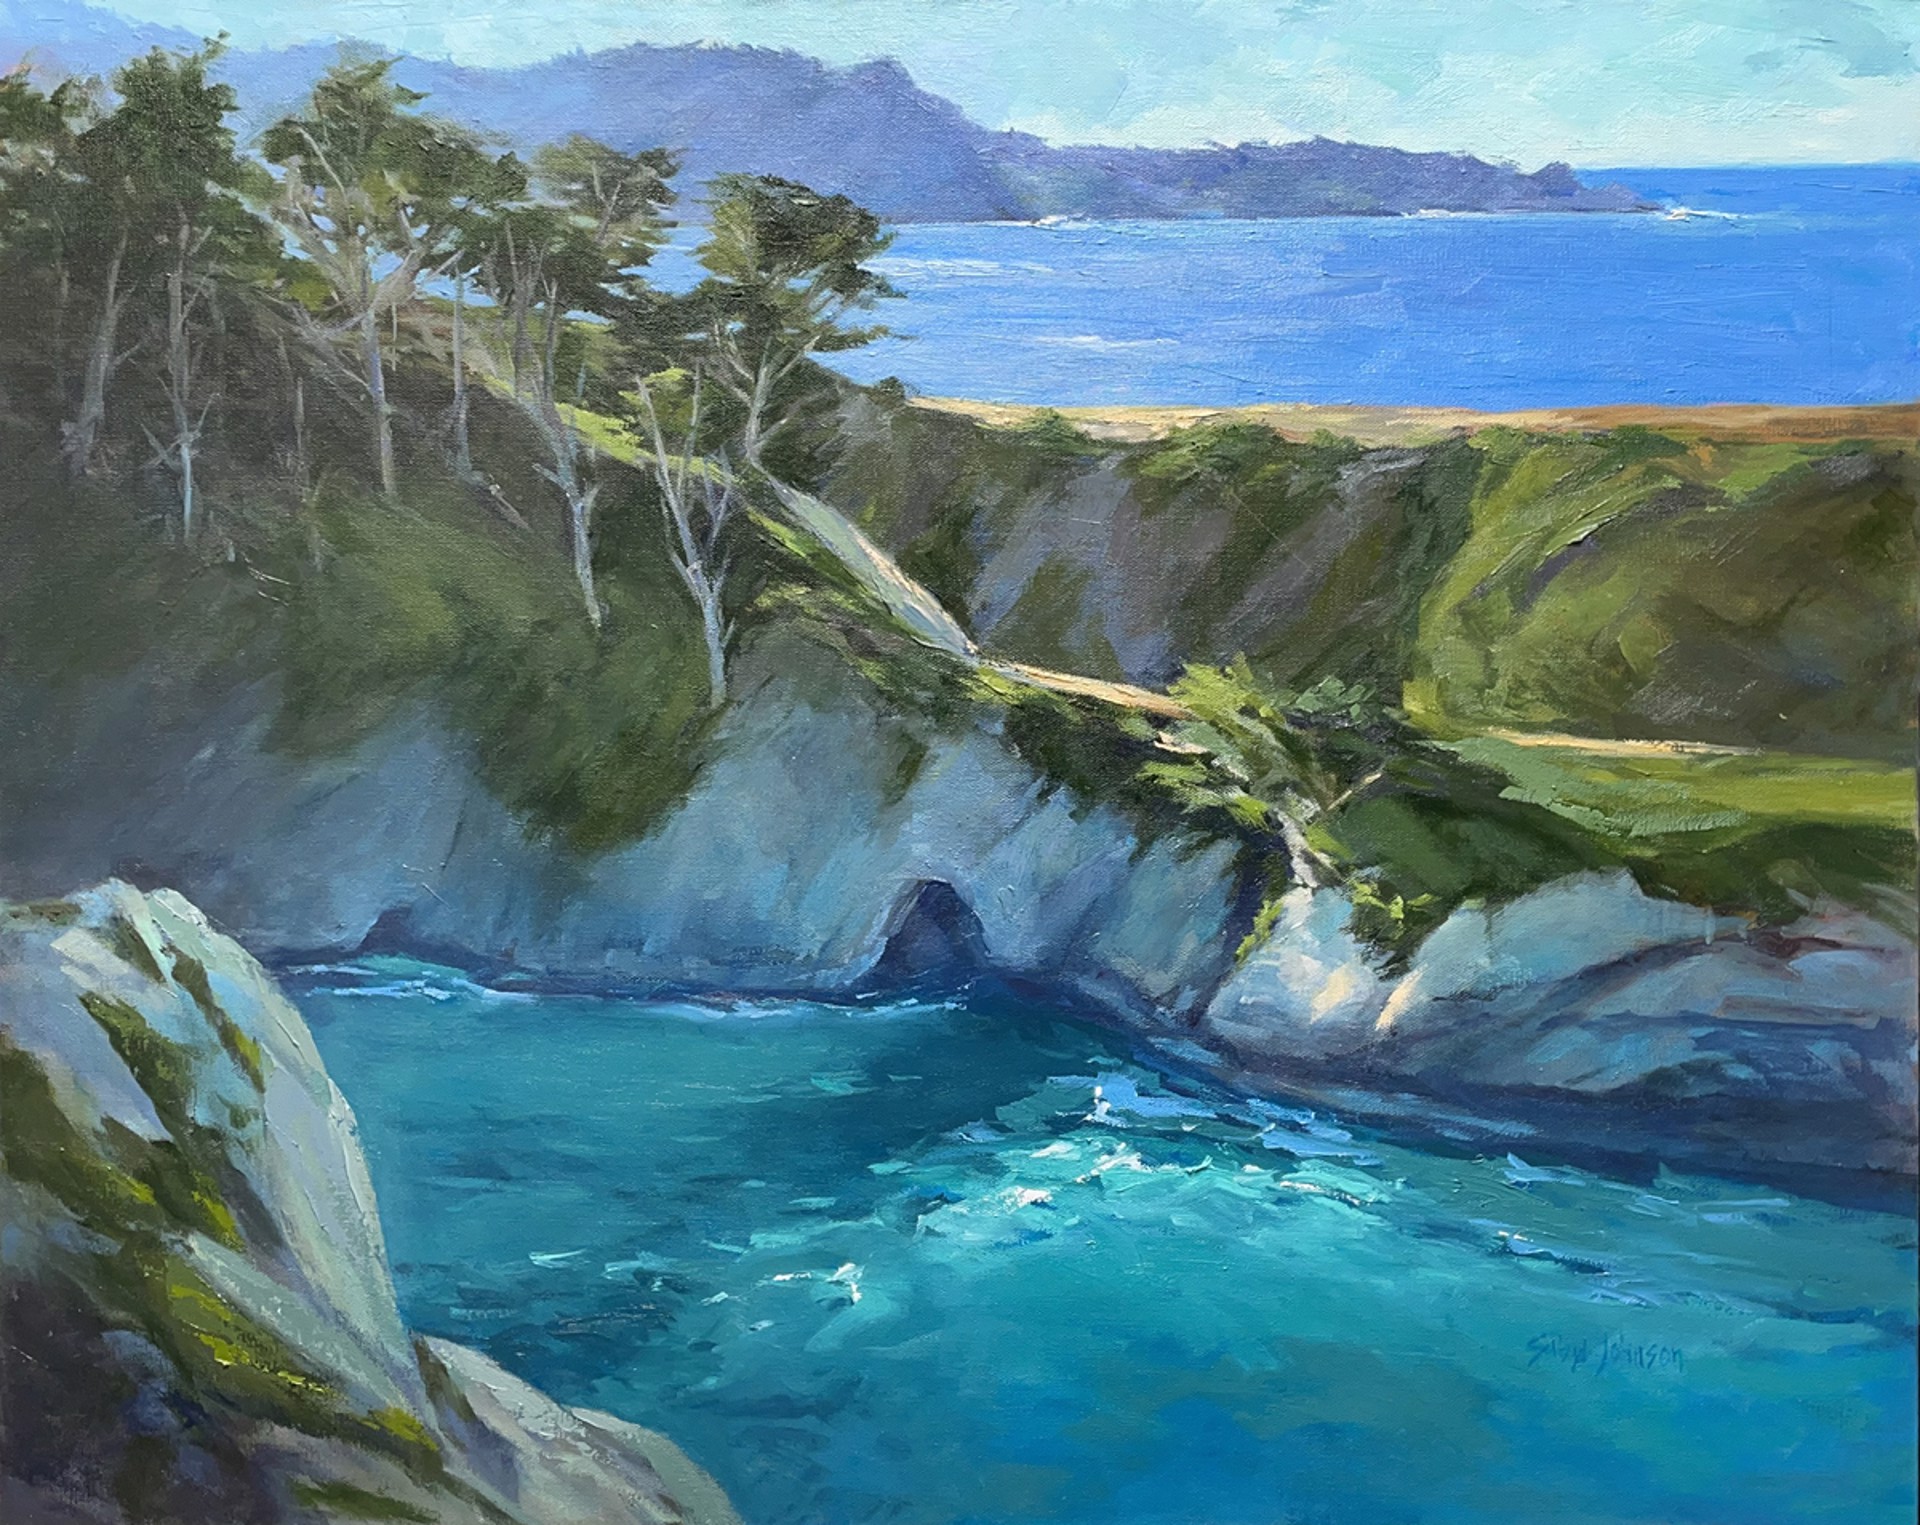 China Cove in Winter by Sibyl Johnson